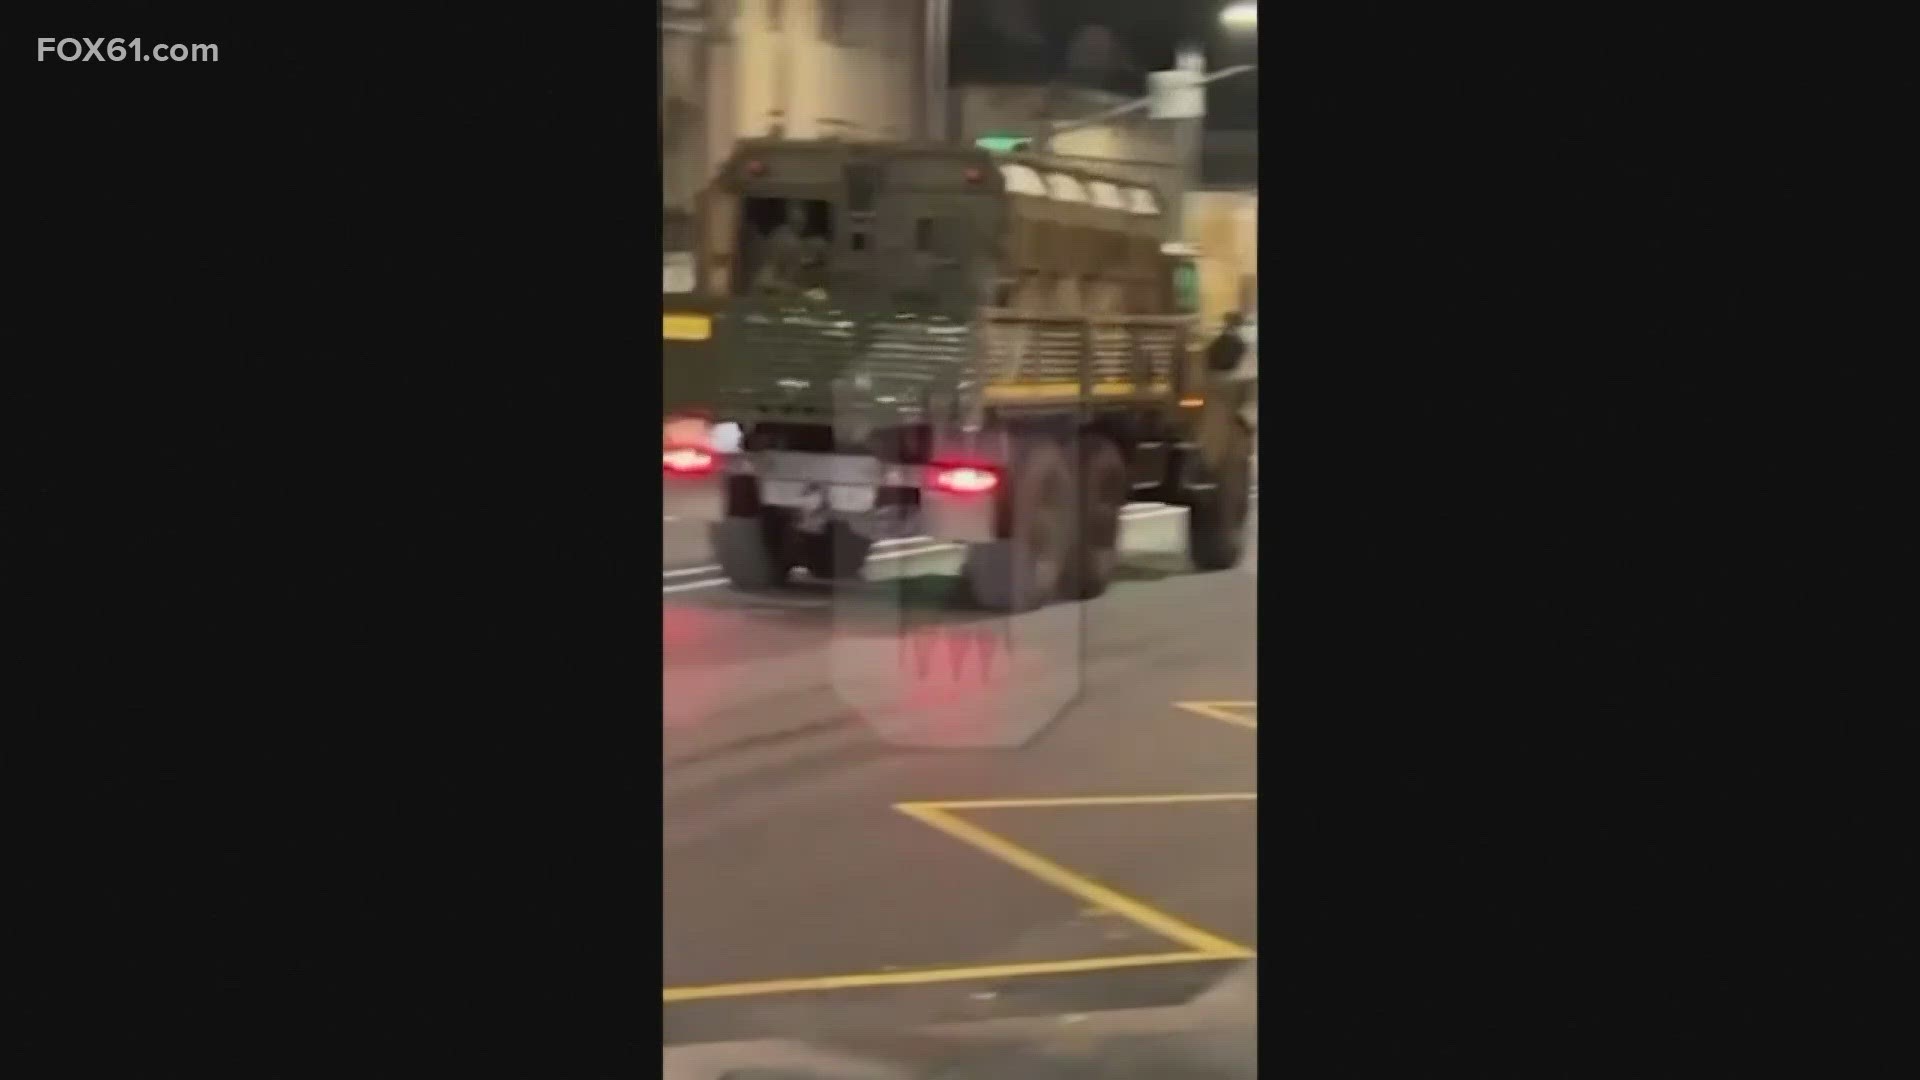 Military vehicles mobilized in Moscow after the leader of the Wagner group posted a series of angry videos and audio recordings.